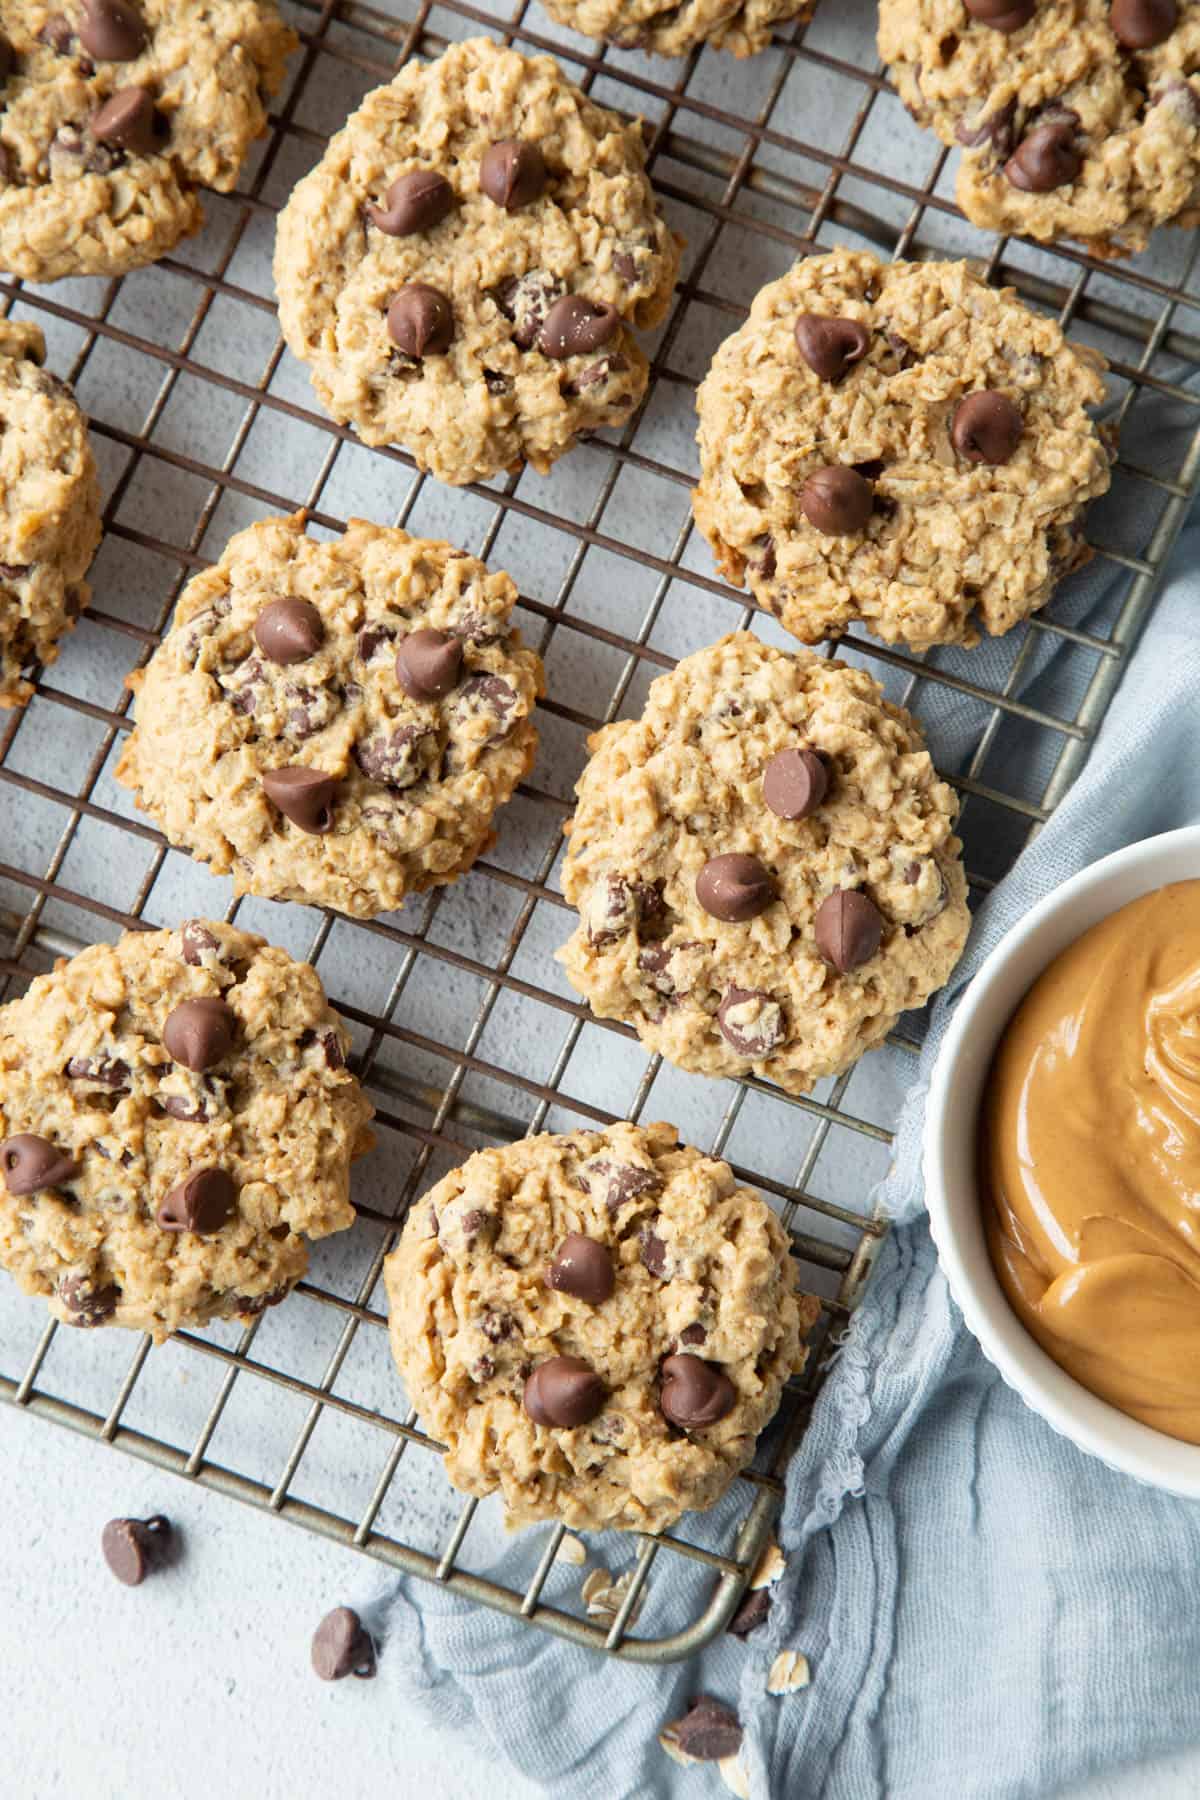 peanut butter oatmeal cookies with chocolate chips on a wire rack next to a small dish of peanut butter.